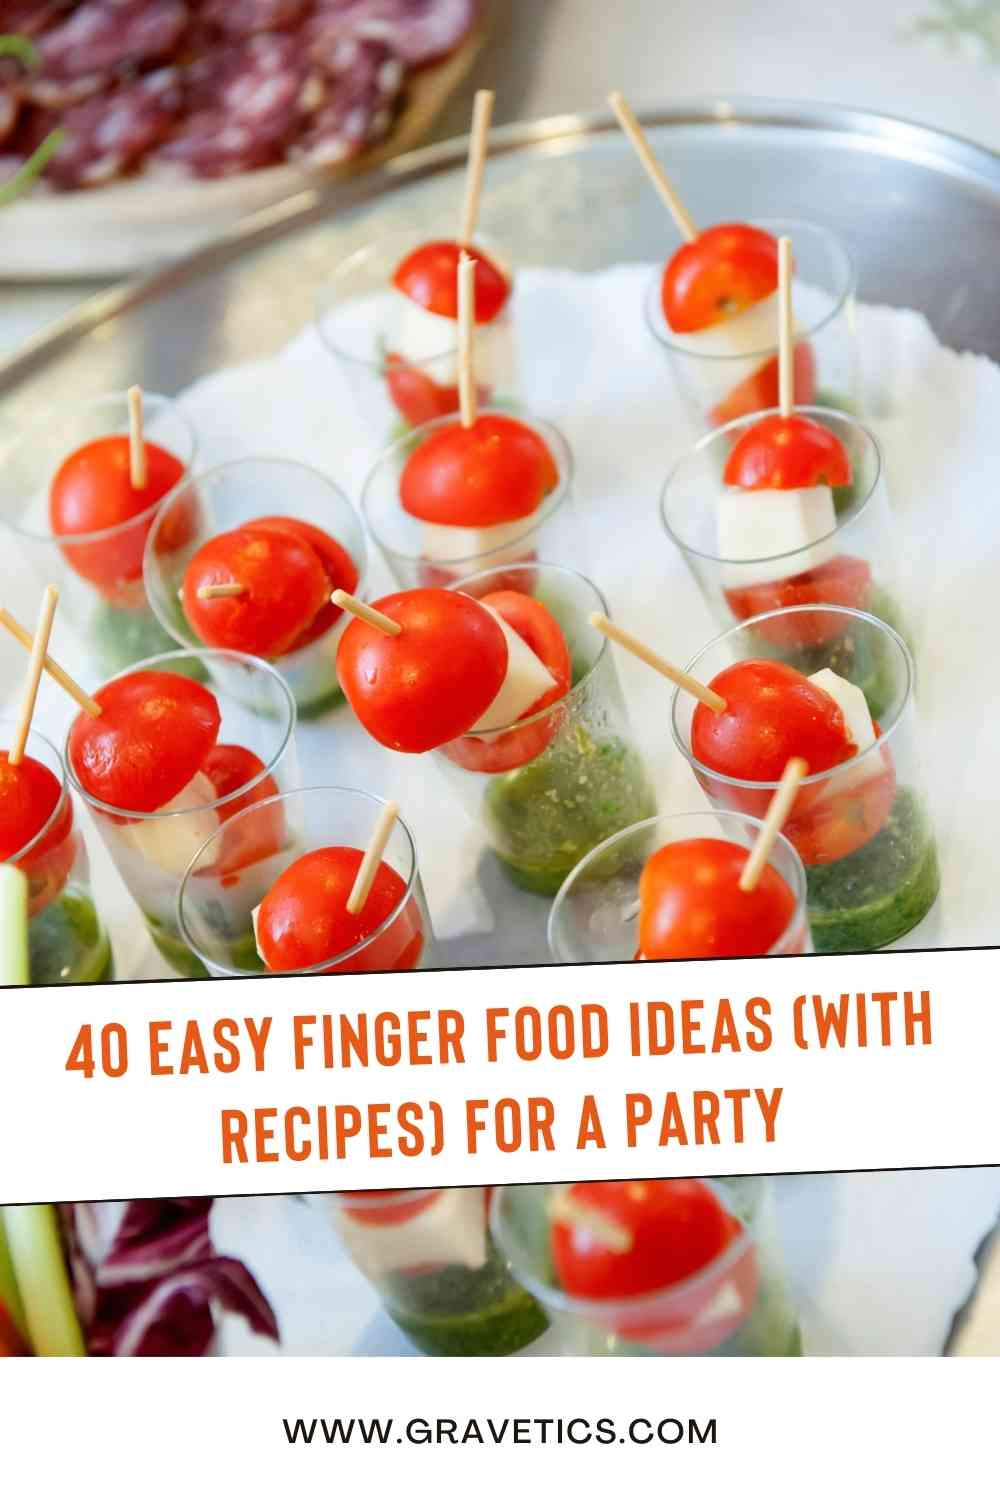 40 Easy Finger Food Ideas (with Recipes) for a Party